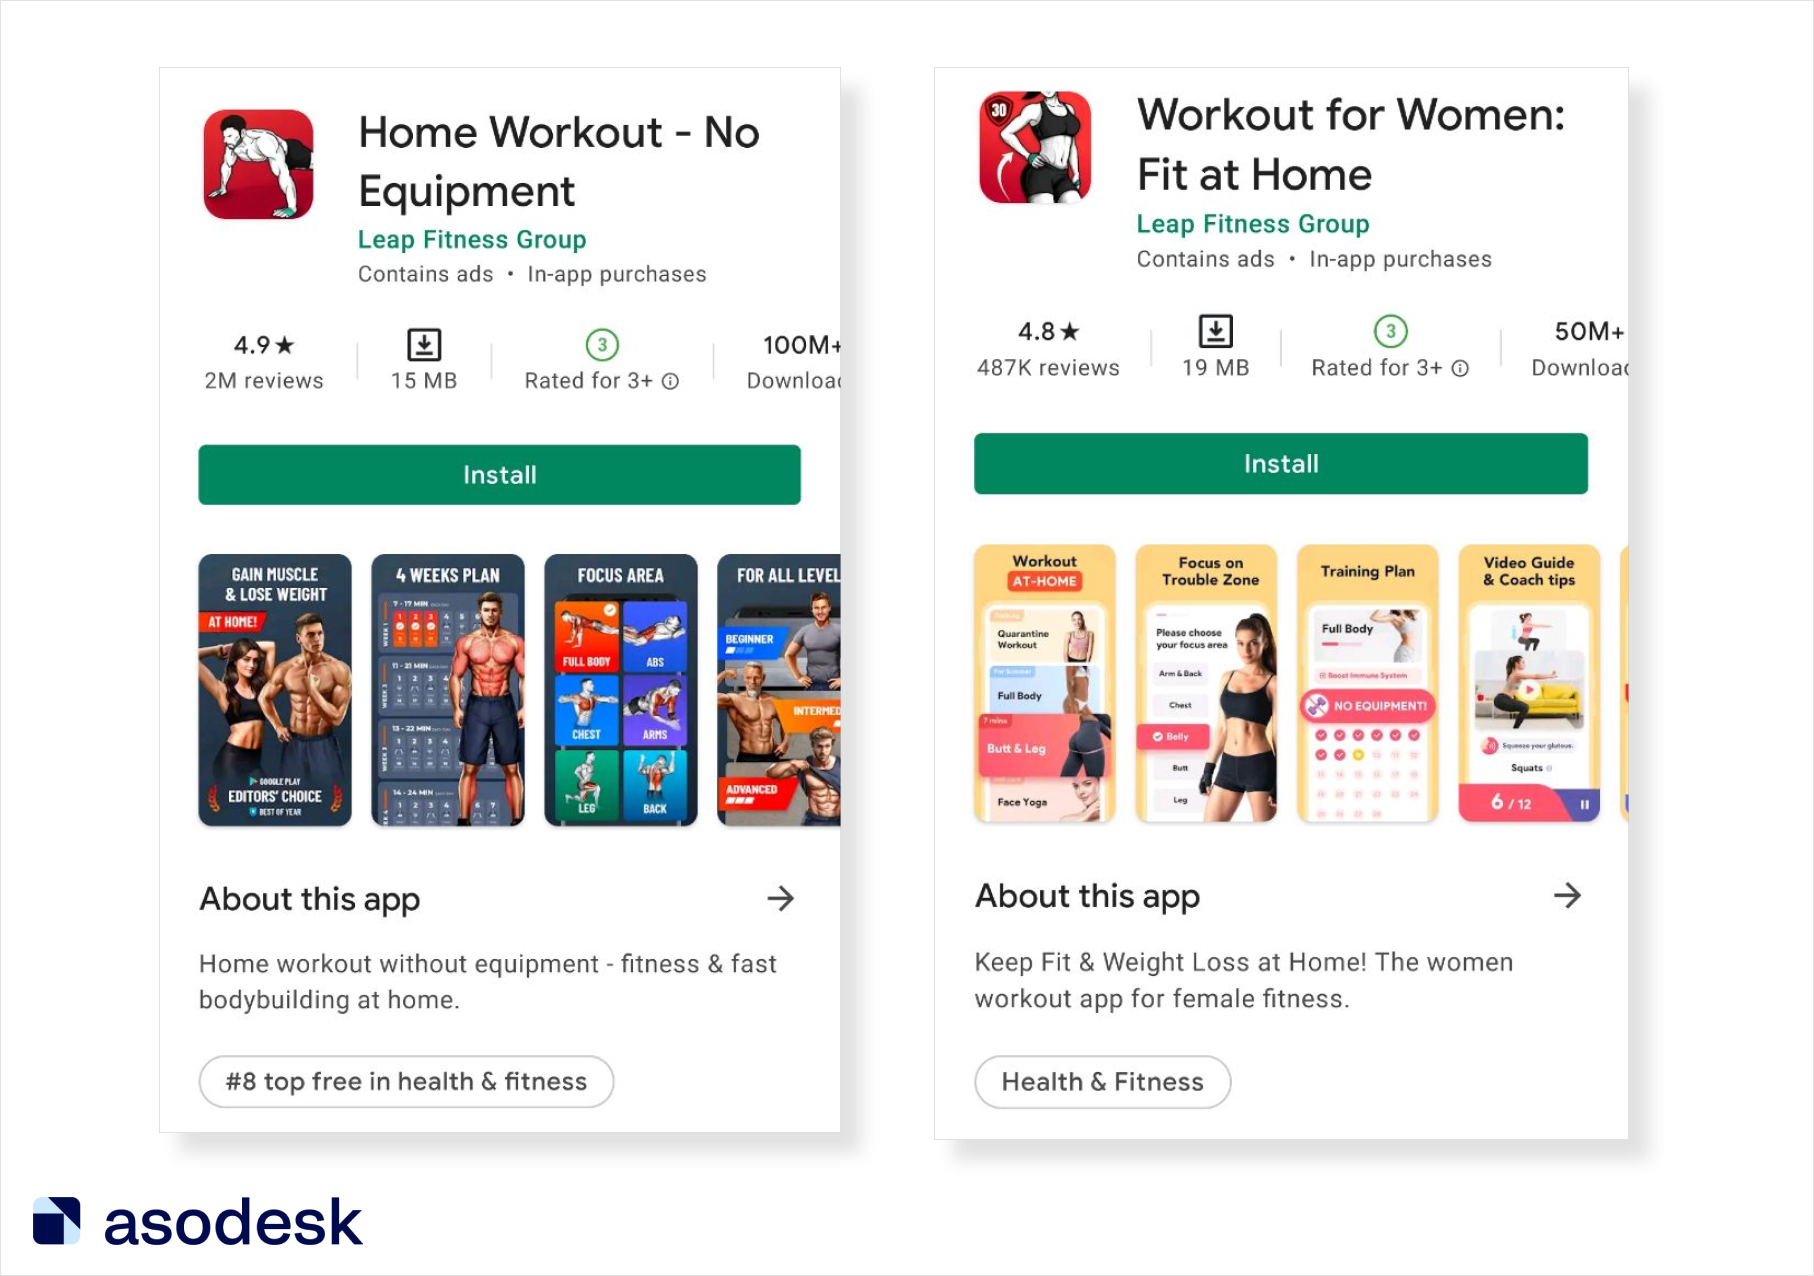 Leap Fitness Group publisher's fitness app brief focuses on the needs of the target audience